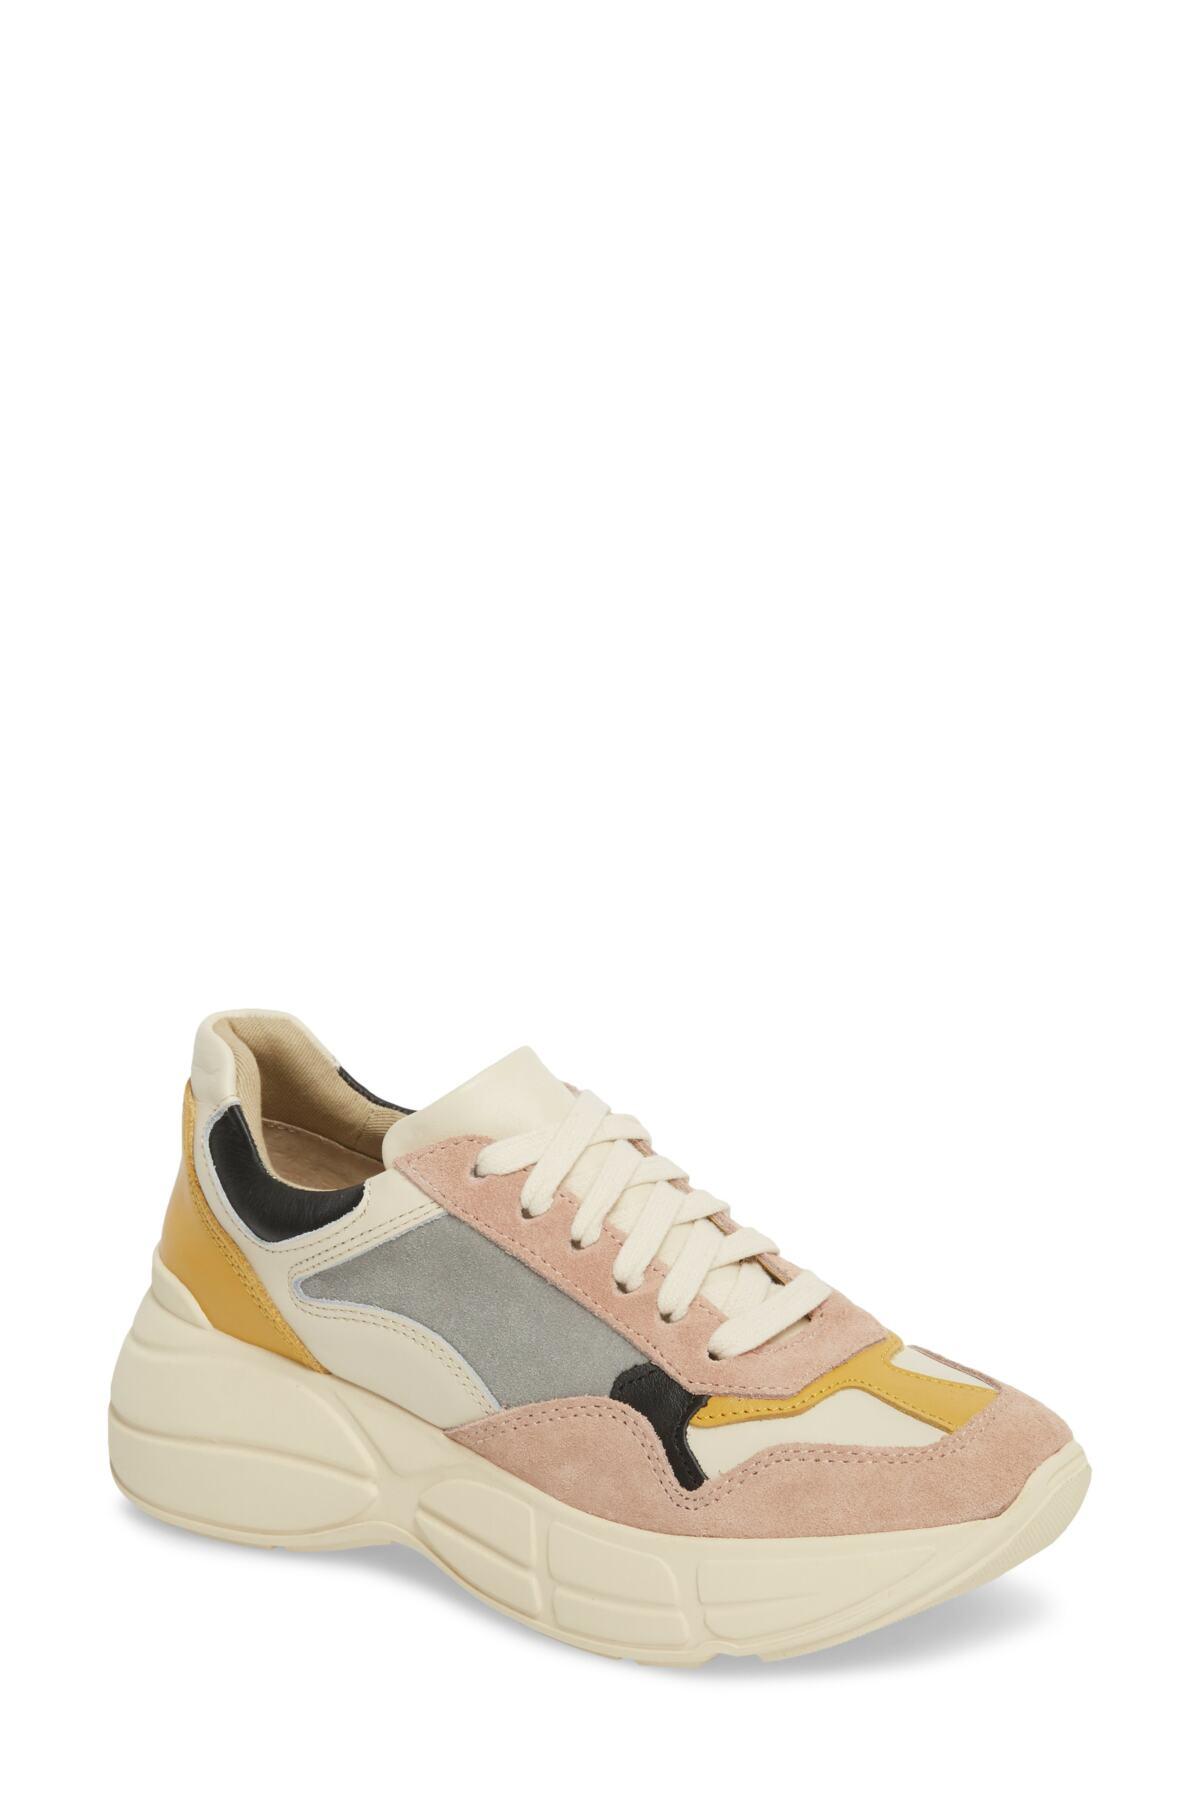 Steve Madden Leather Memory Chunky Sneakers - Lyst